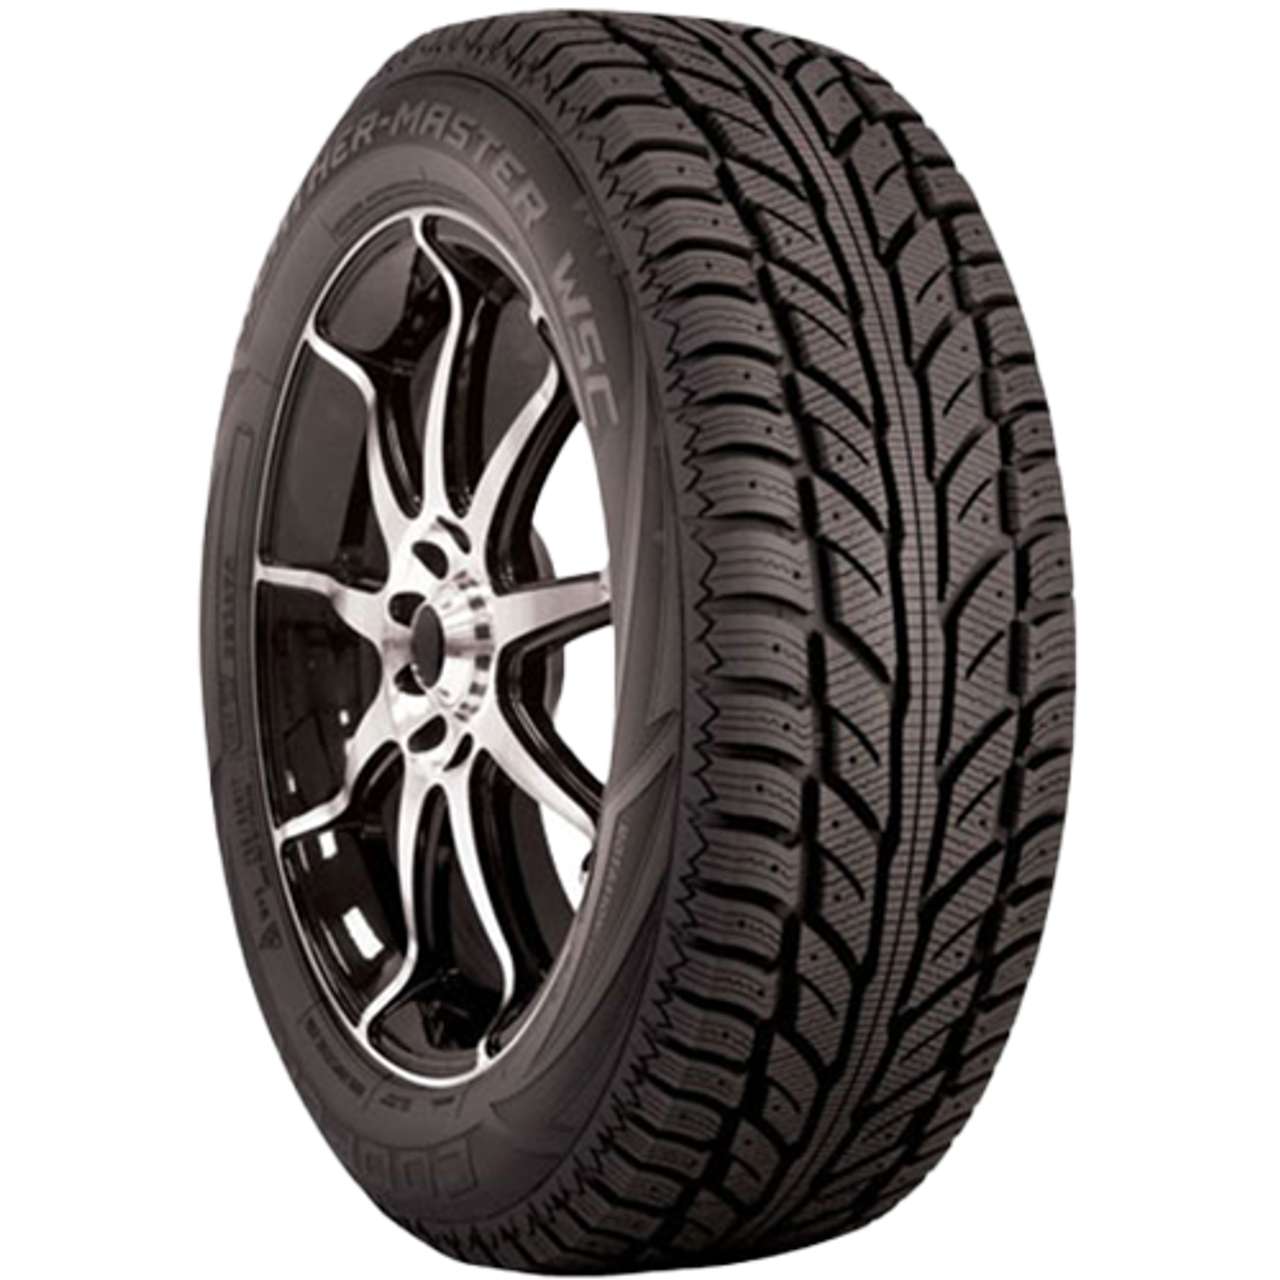 COOPER WEATHERMASTER WSC 245/65R17 107T STUDDABLE BSW